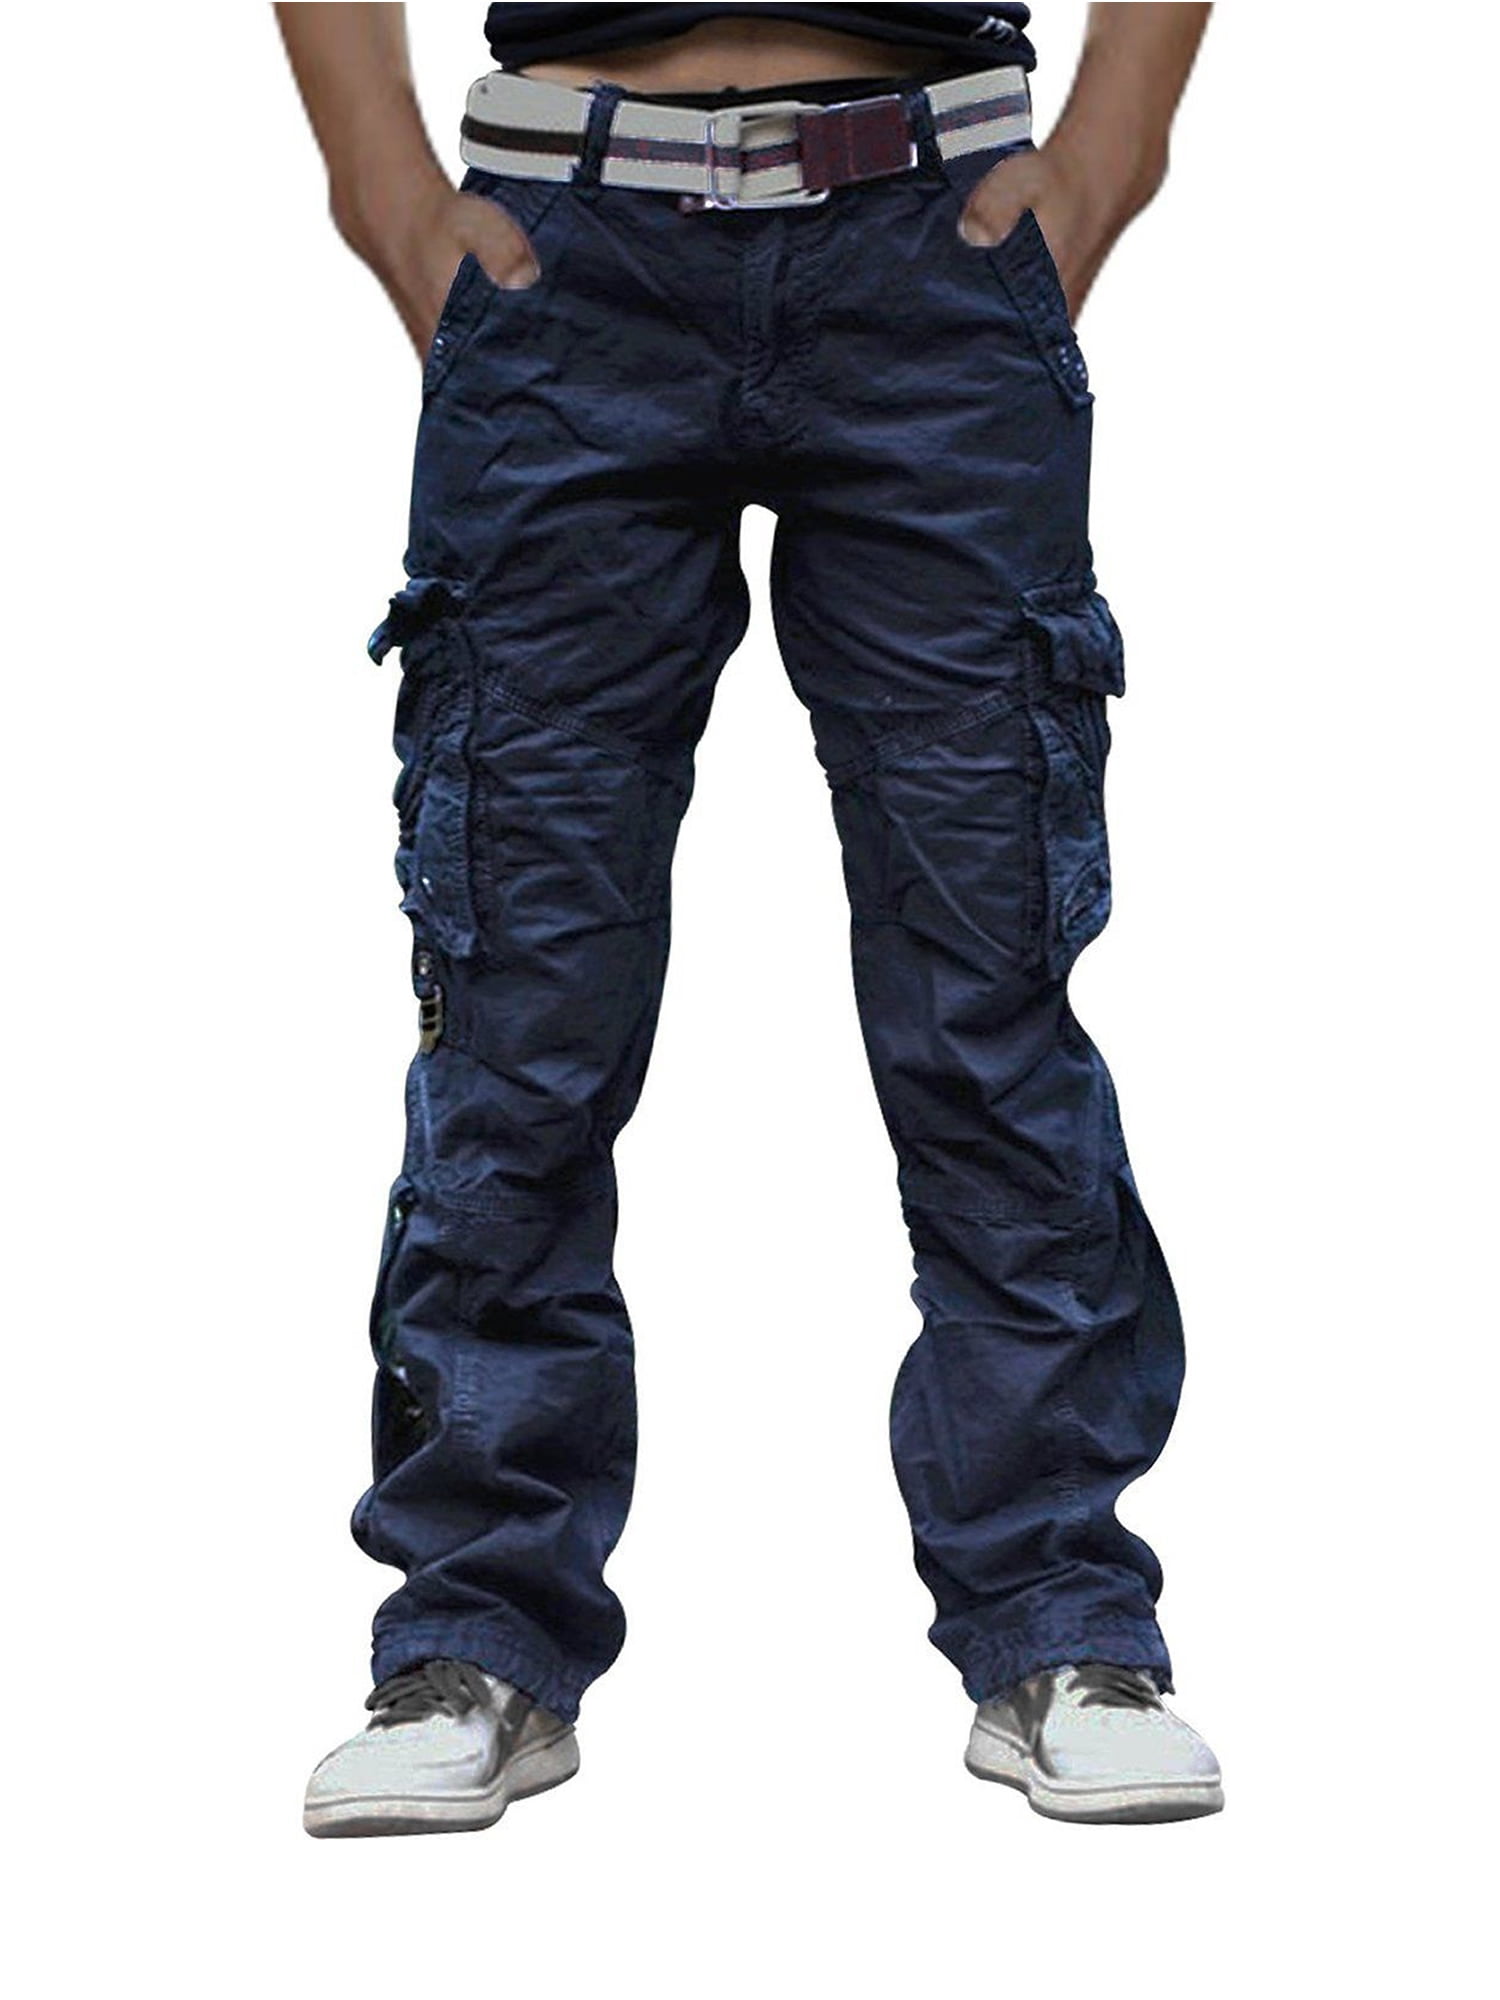 AKARMY Men's Casual Relaxed Fit Cargo Pants Outdoor Hiking Pants Cotton Twill Combat Pants 